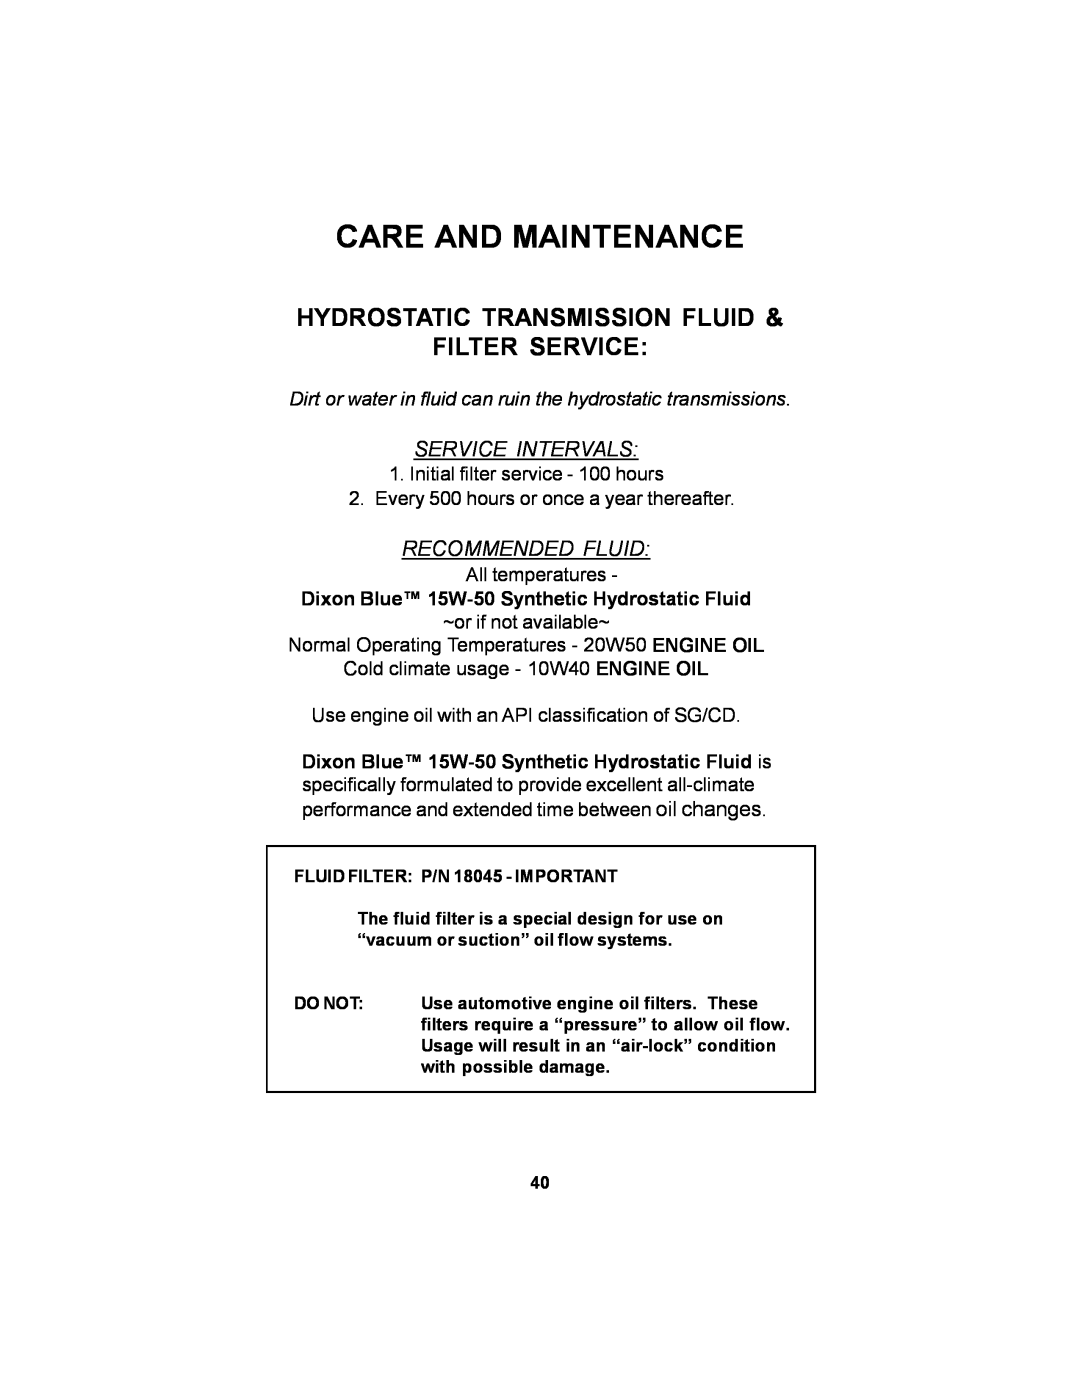 Dixon 12881-106 Hydrostatic Transmission Fluid Filter Service, Care And Maintenance, Service Intervals, Recommended Fluid 